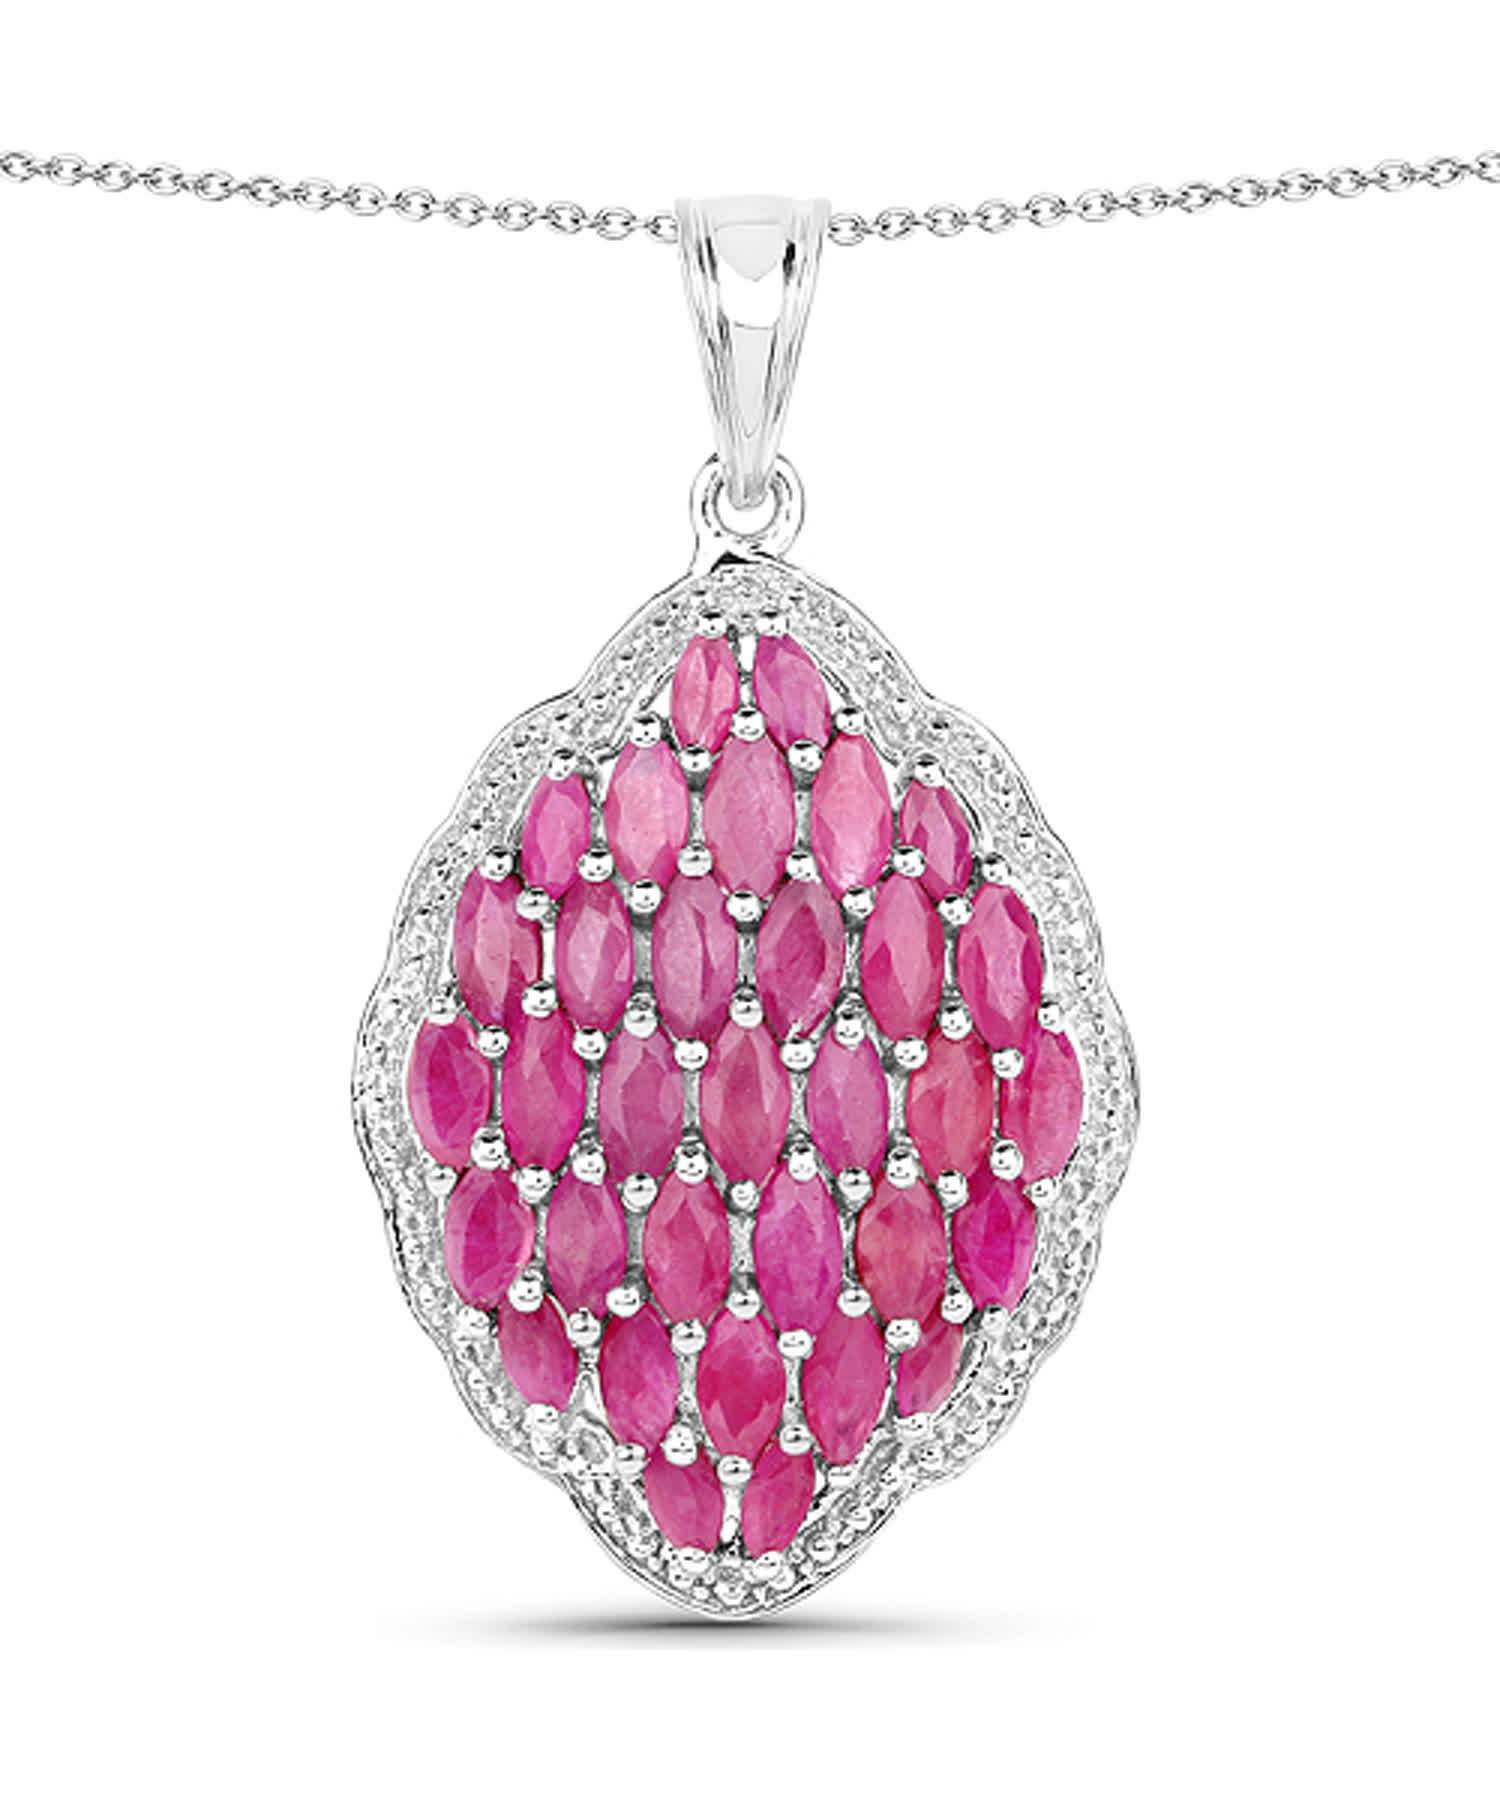 4.46ctw Natural Ruby Rhodium Plated 925 Sterling Silver Pendant With Chain View 1